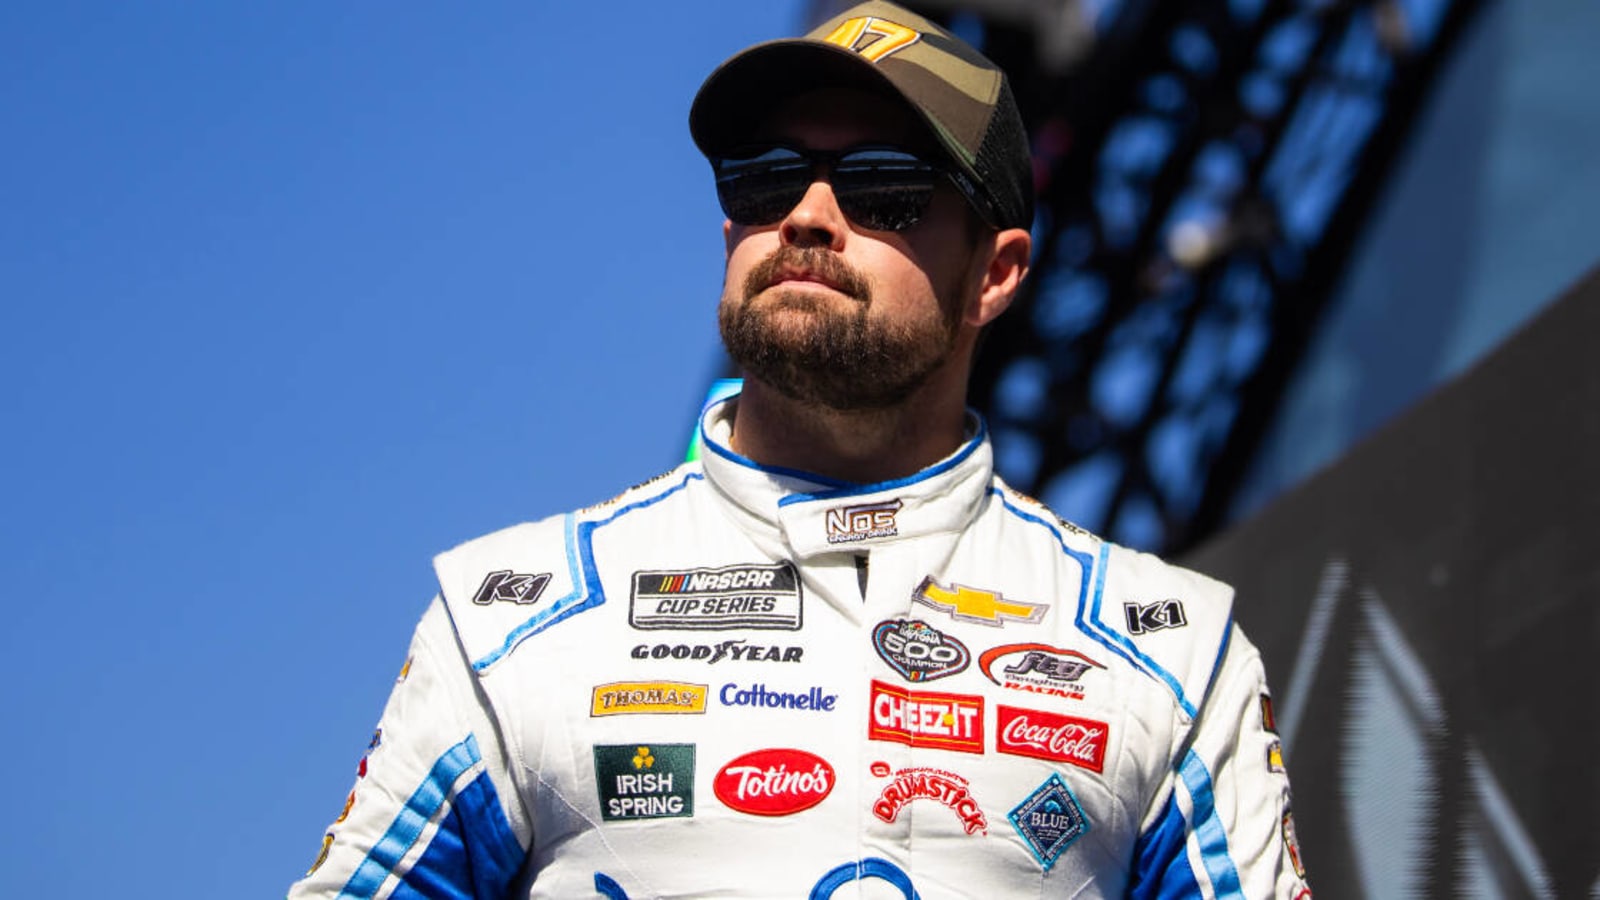 Ricky Stenhouse Jr. wrecks at Chili Bowl, will start in E-Feature for Saturday